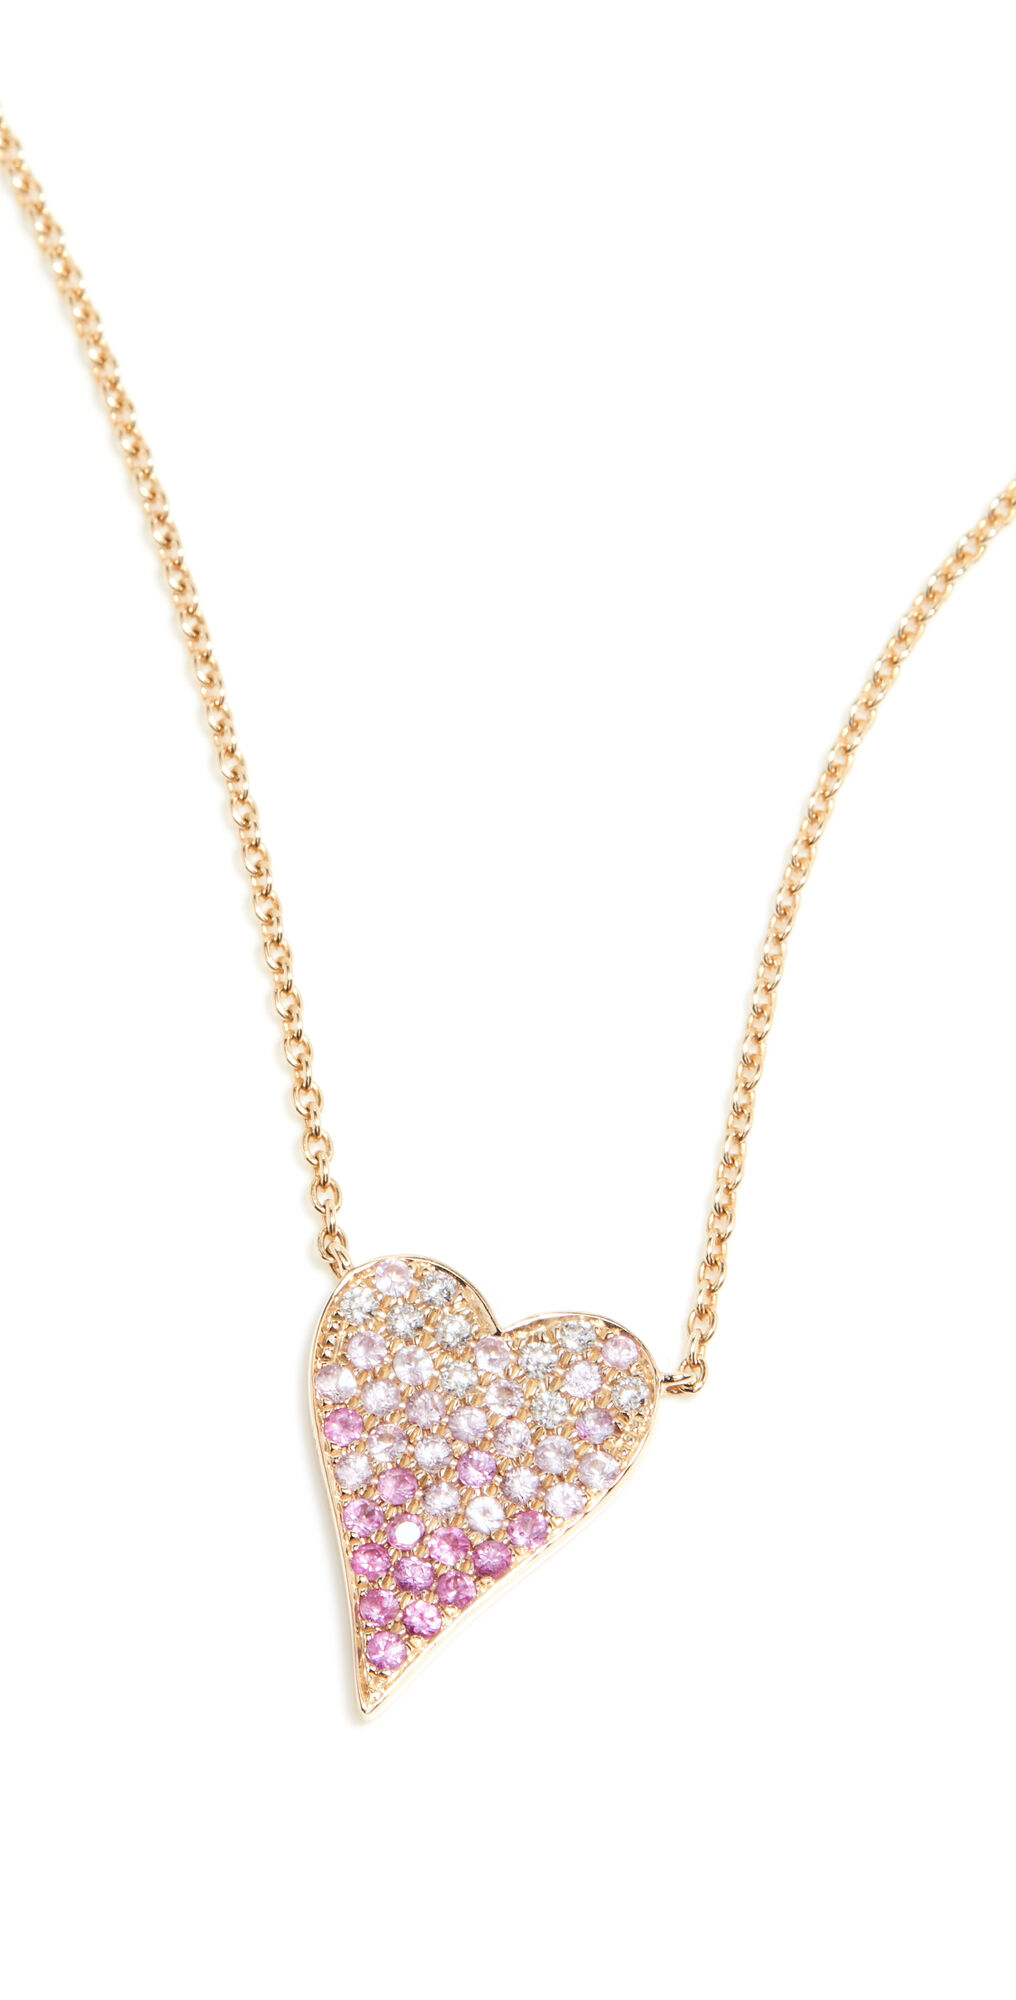 Stephanie Gottlieb 14k Small Pave Ombre Heart Necklace 14K Yellow Gold / Ombre Pink S One Size  14K Yellow Gold / Ombre Pink S  size:One Size